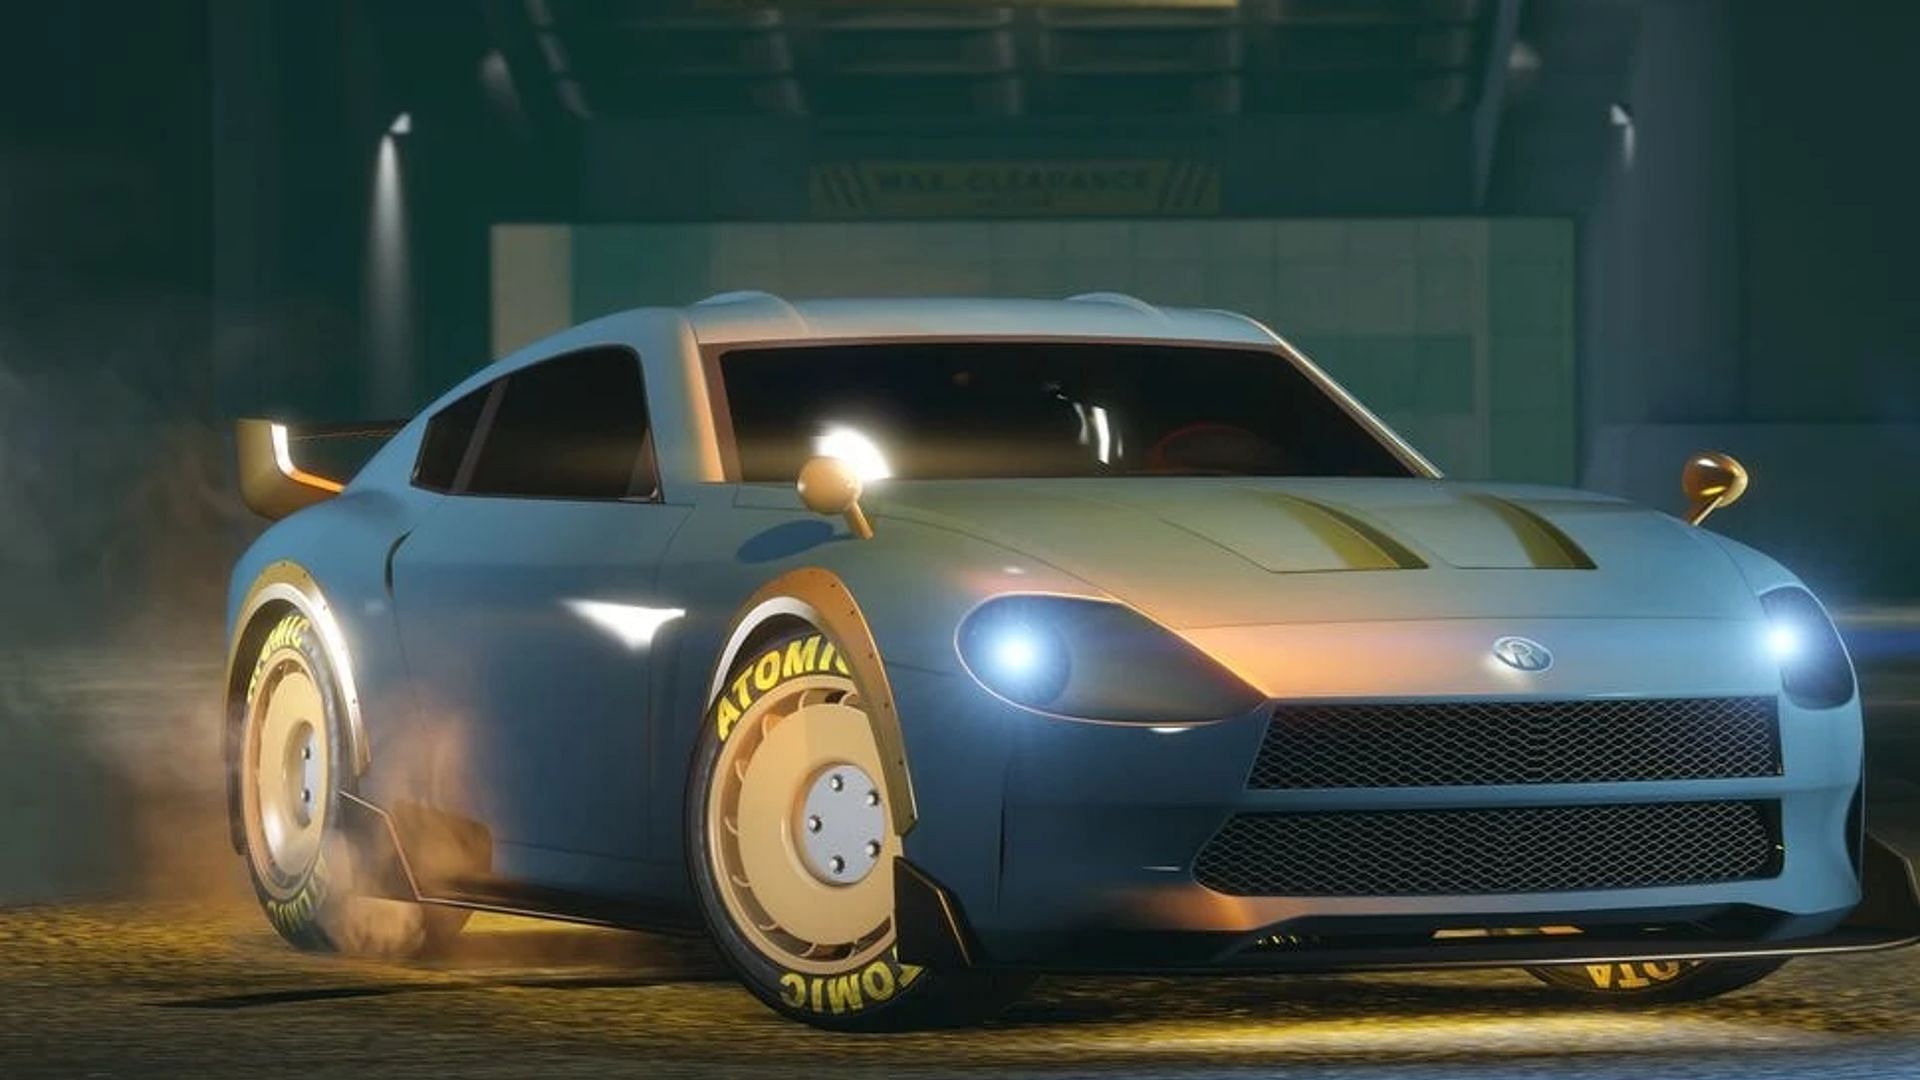 Another photo featuring this vehicle (Image via Rockstar Games)